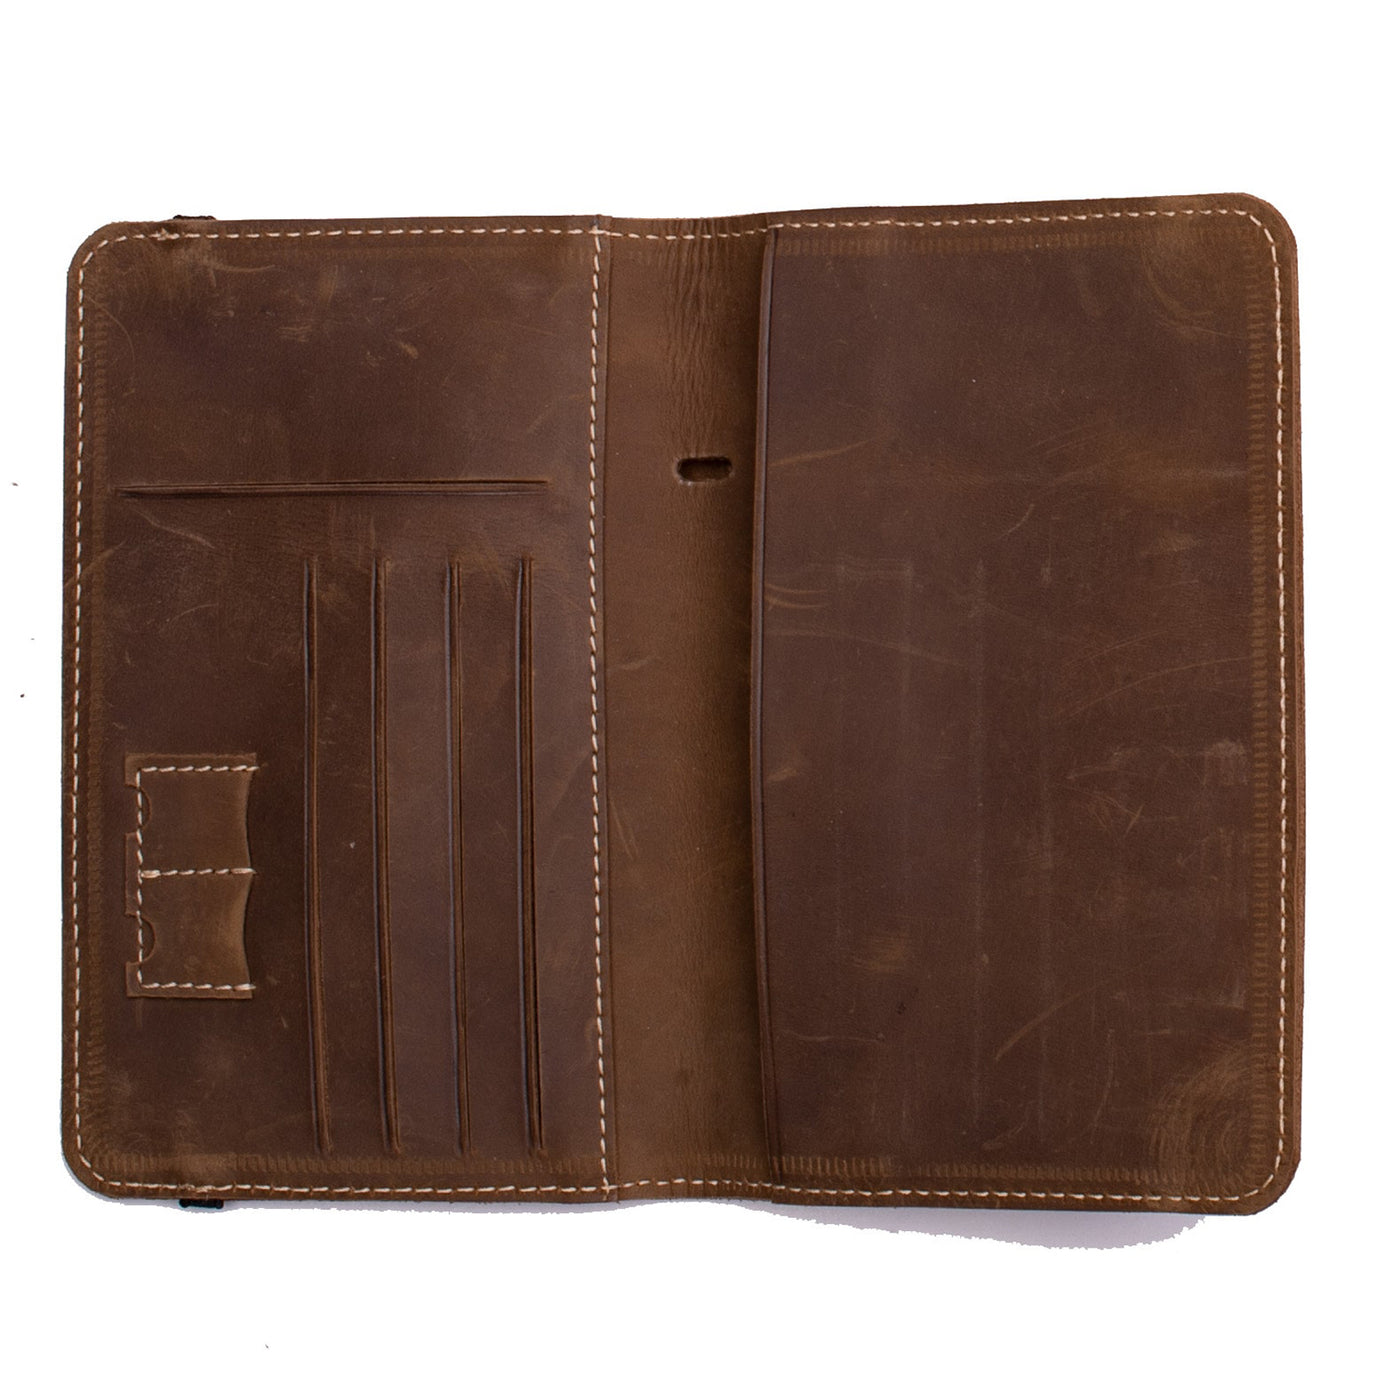 Canadian Brown Leather Passport Cover and Travel Wallet